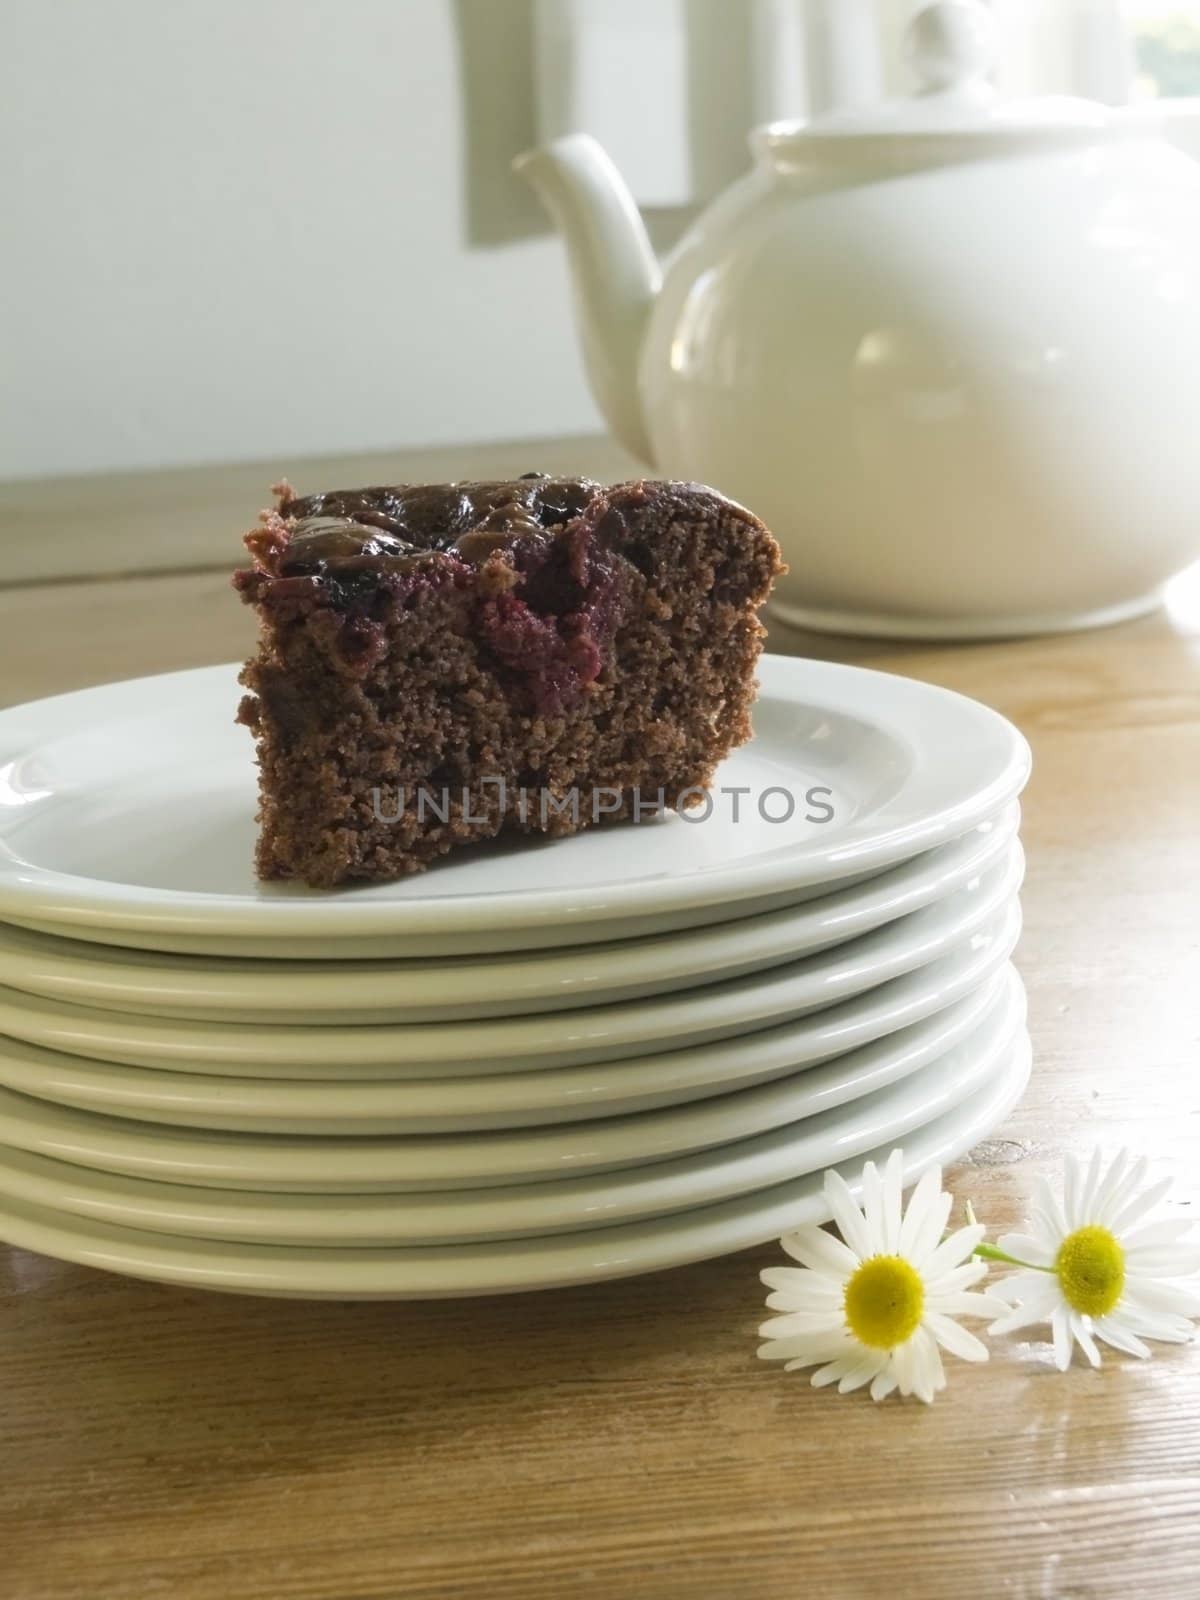 close-up of chocolate cake with berries